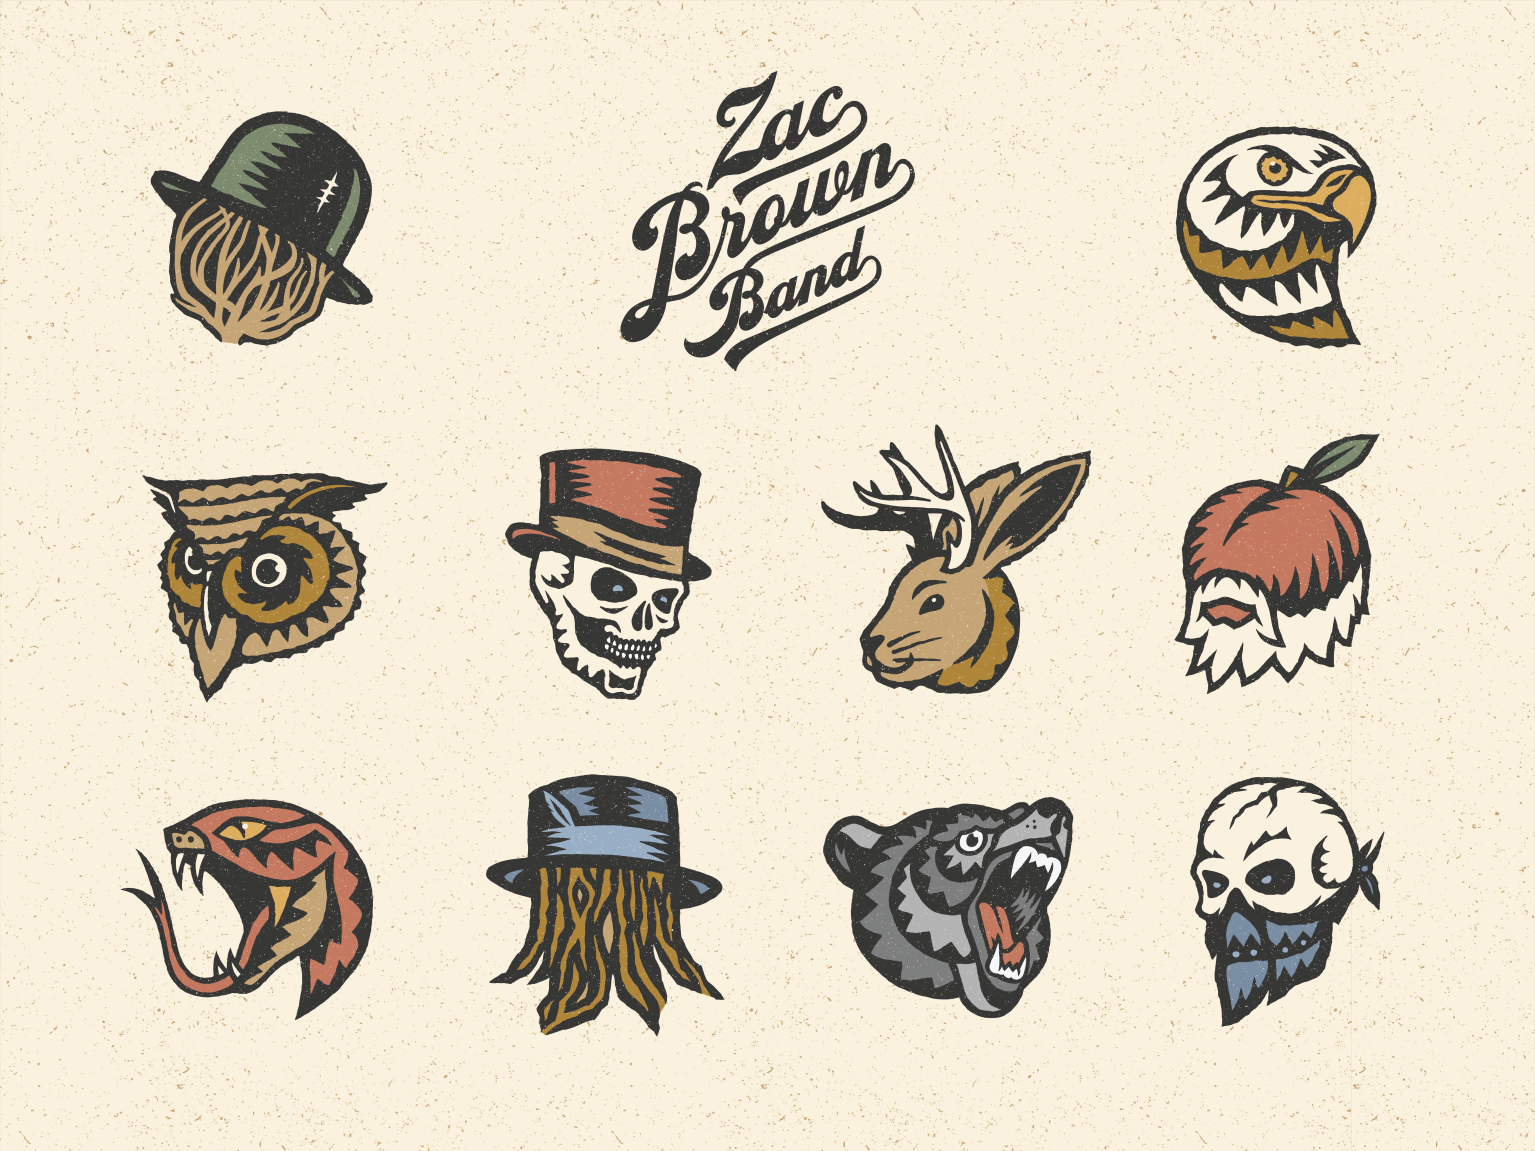 Zac Brown Band Illustrations by Cody Petts on Dribbble